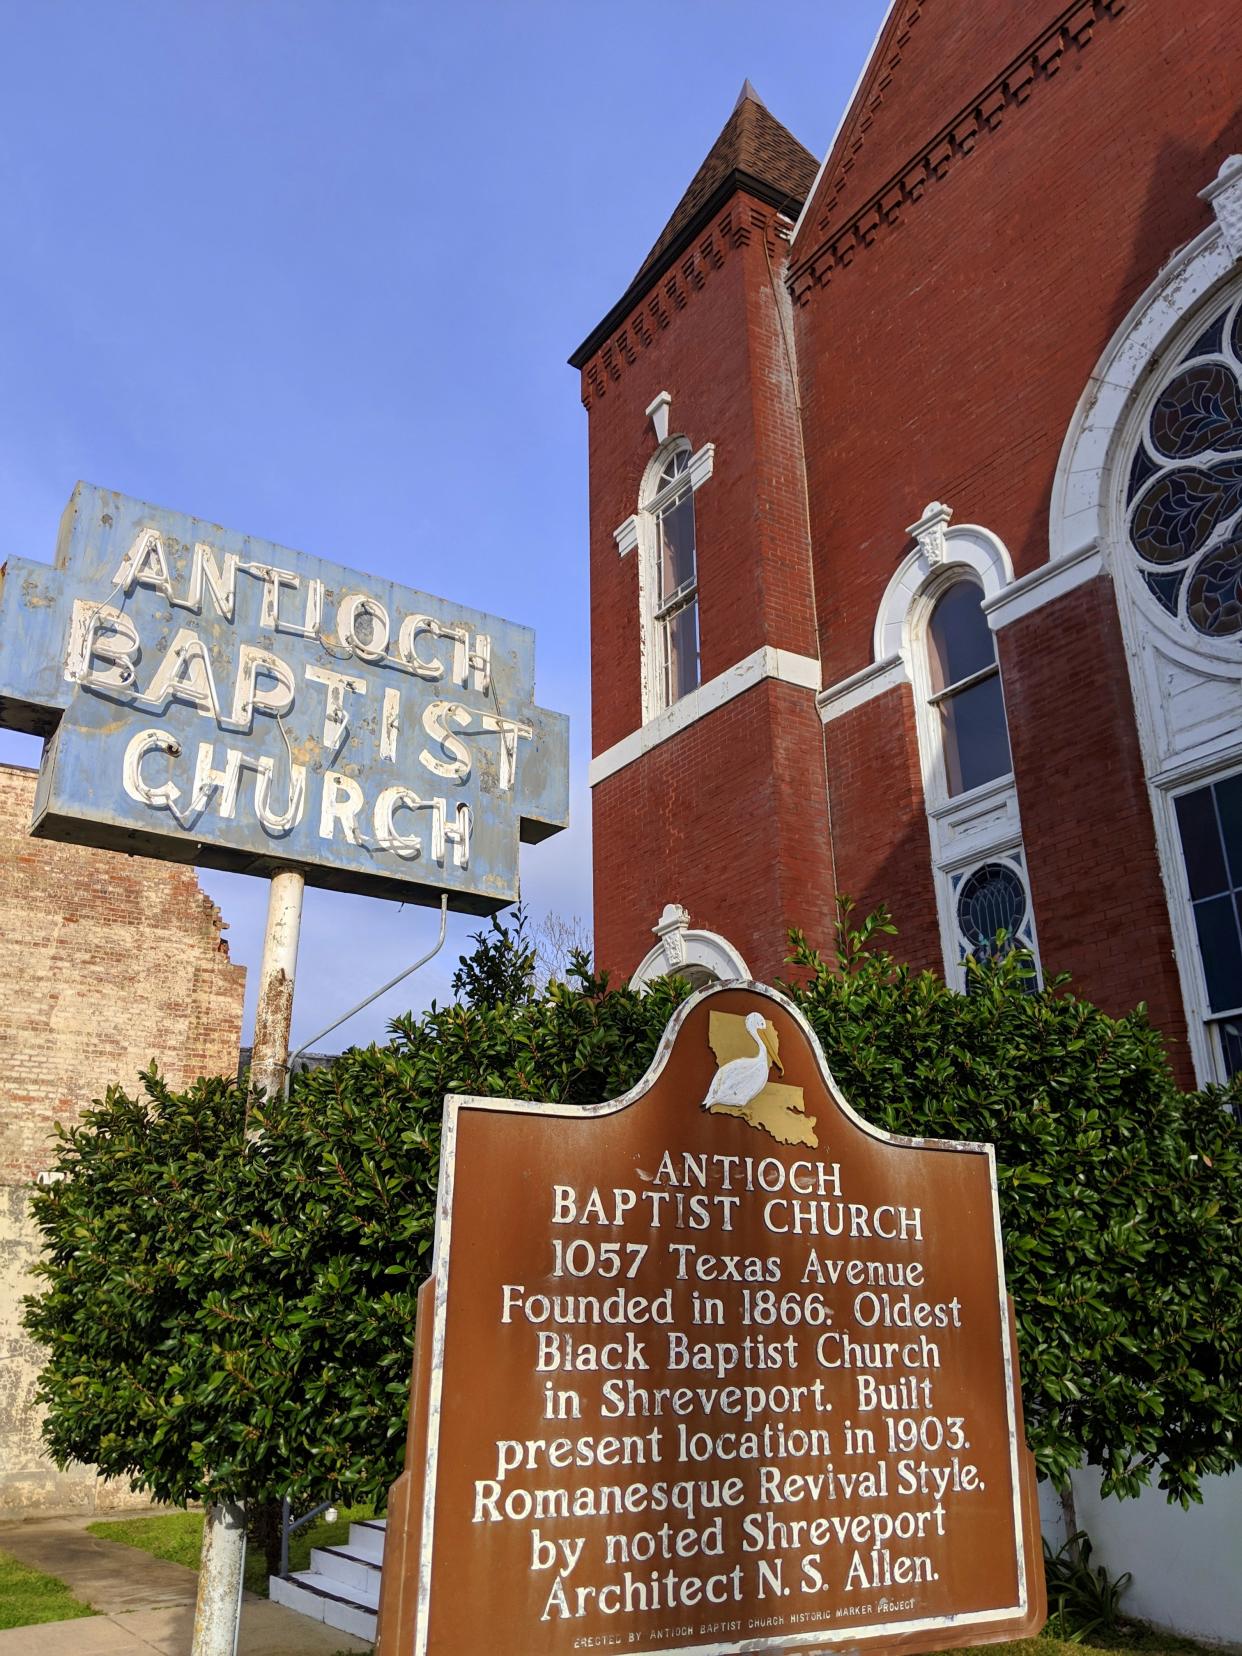 Antioch Baptist Church, located at 1057 Texas Avenue, Shreveport, is listed on the Louisiana Trust for Historic Preservation's Most Endangered Sites list.